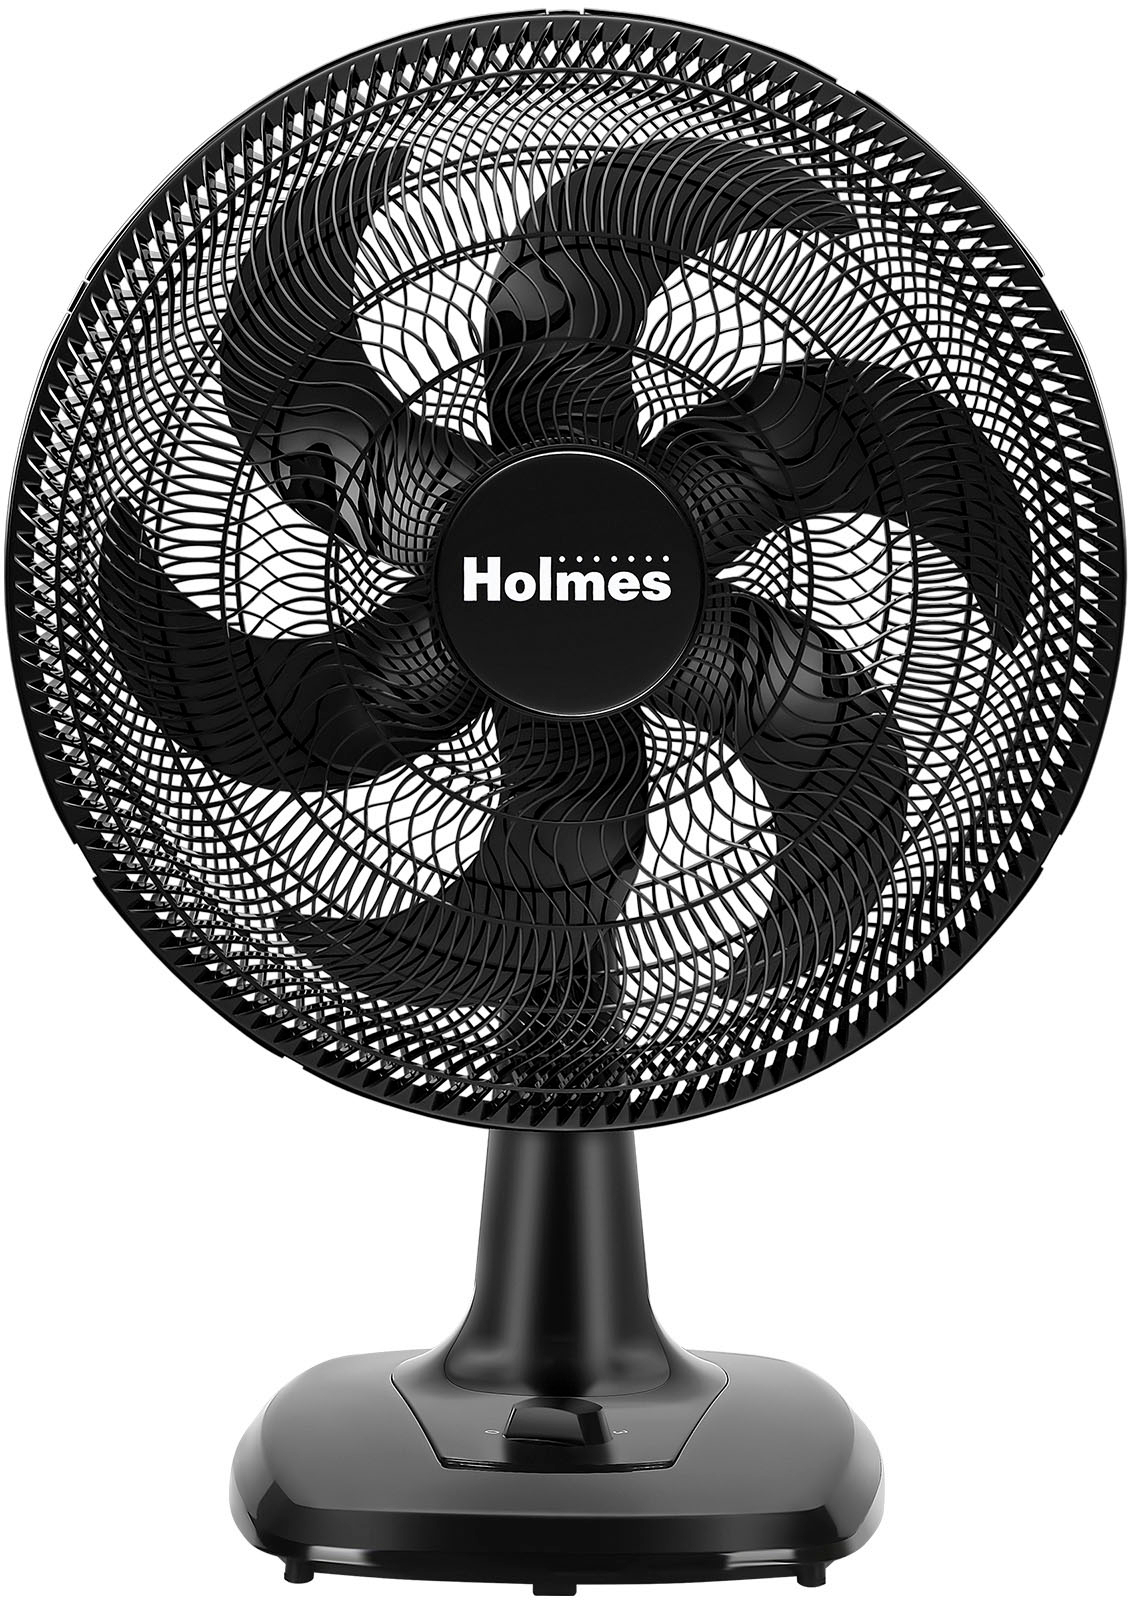 Angle View: Holmes - 16'' Breeze Blaster Oscillating Table Fan - Black